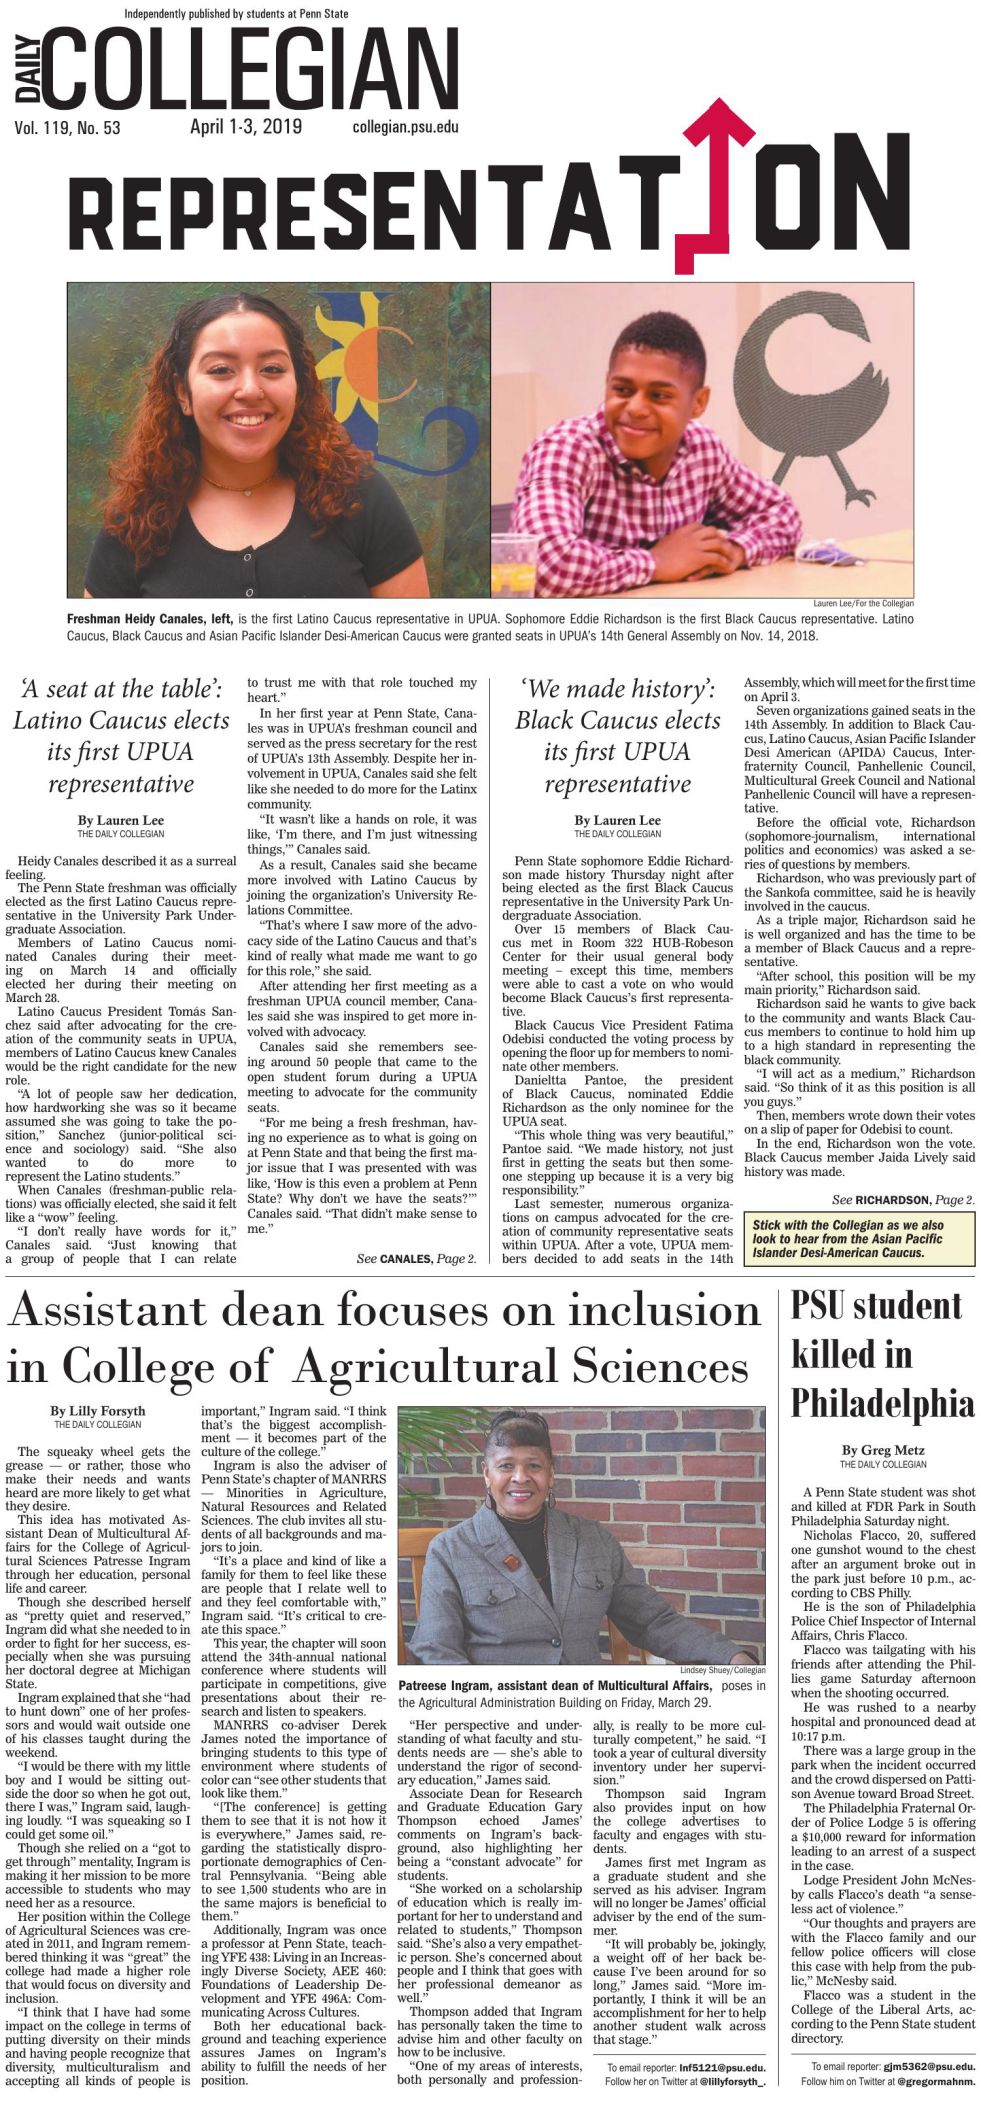 The Daily Collegian for April 1, 2019